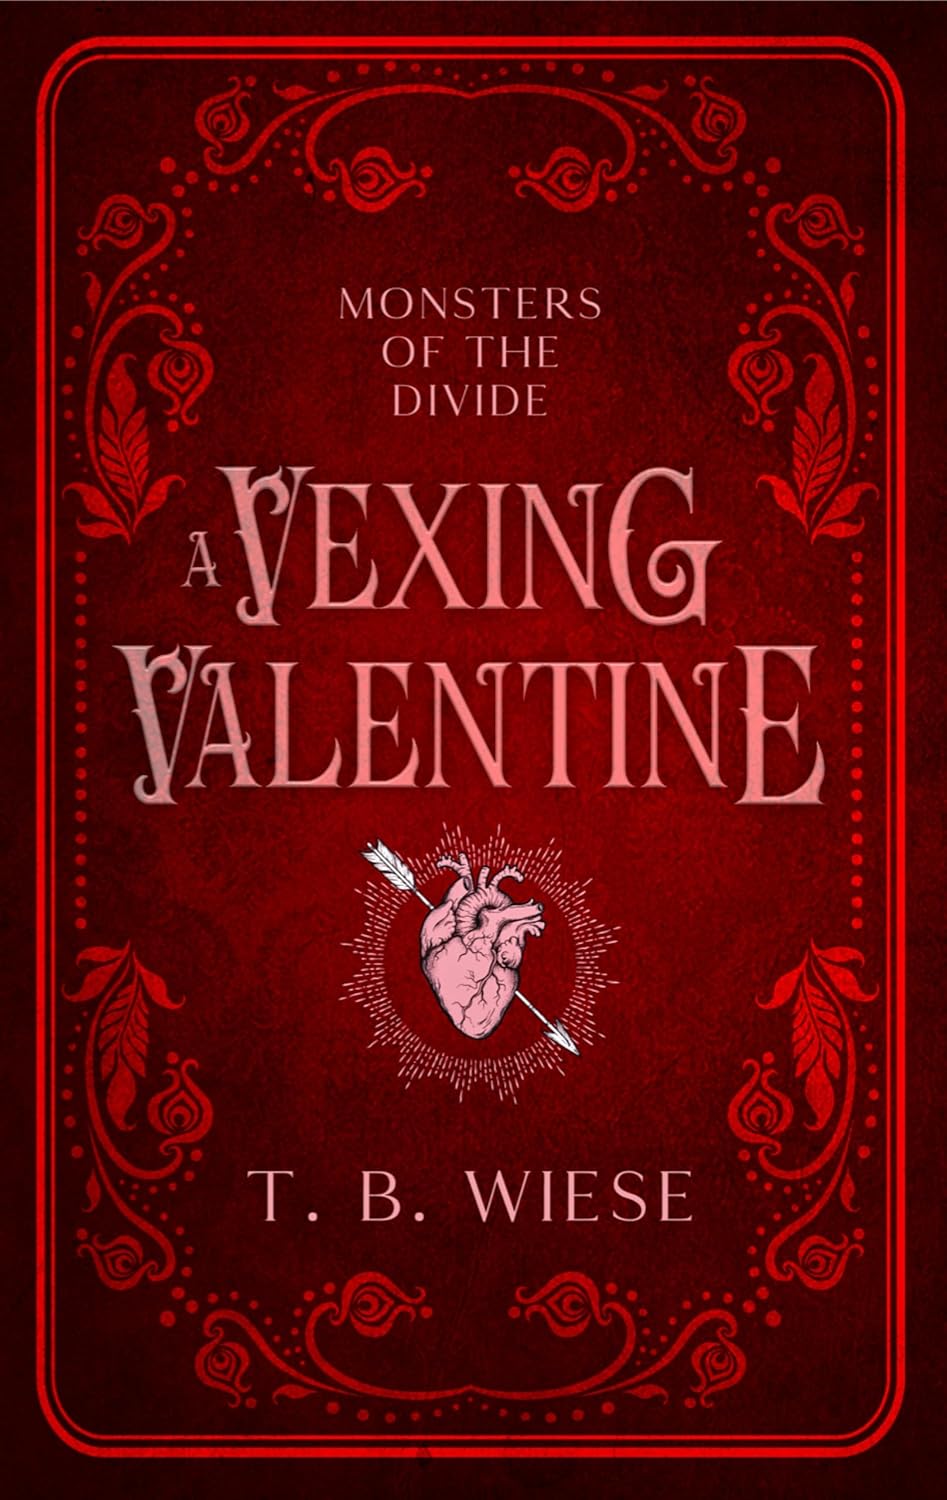 A Vexing Valentine by T. B. Wiese